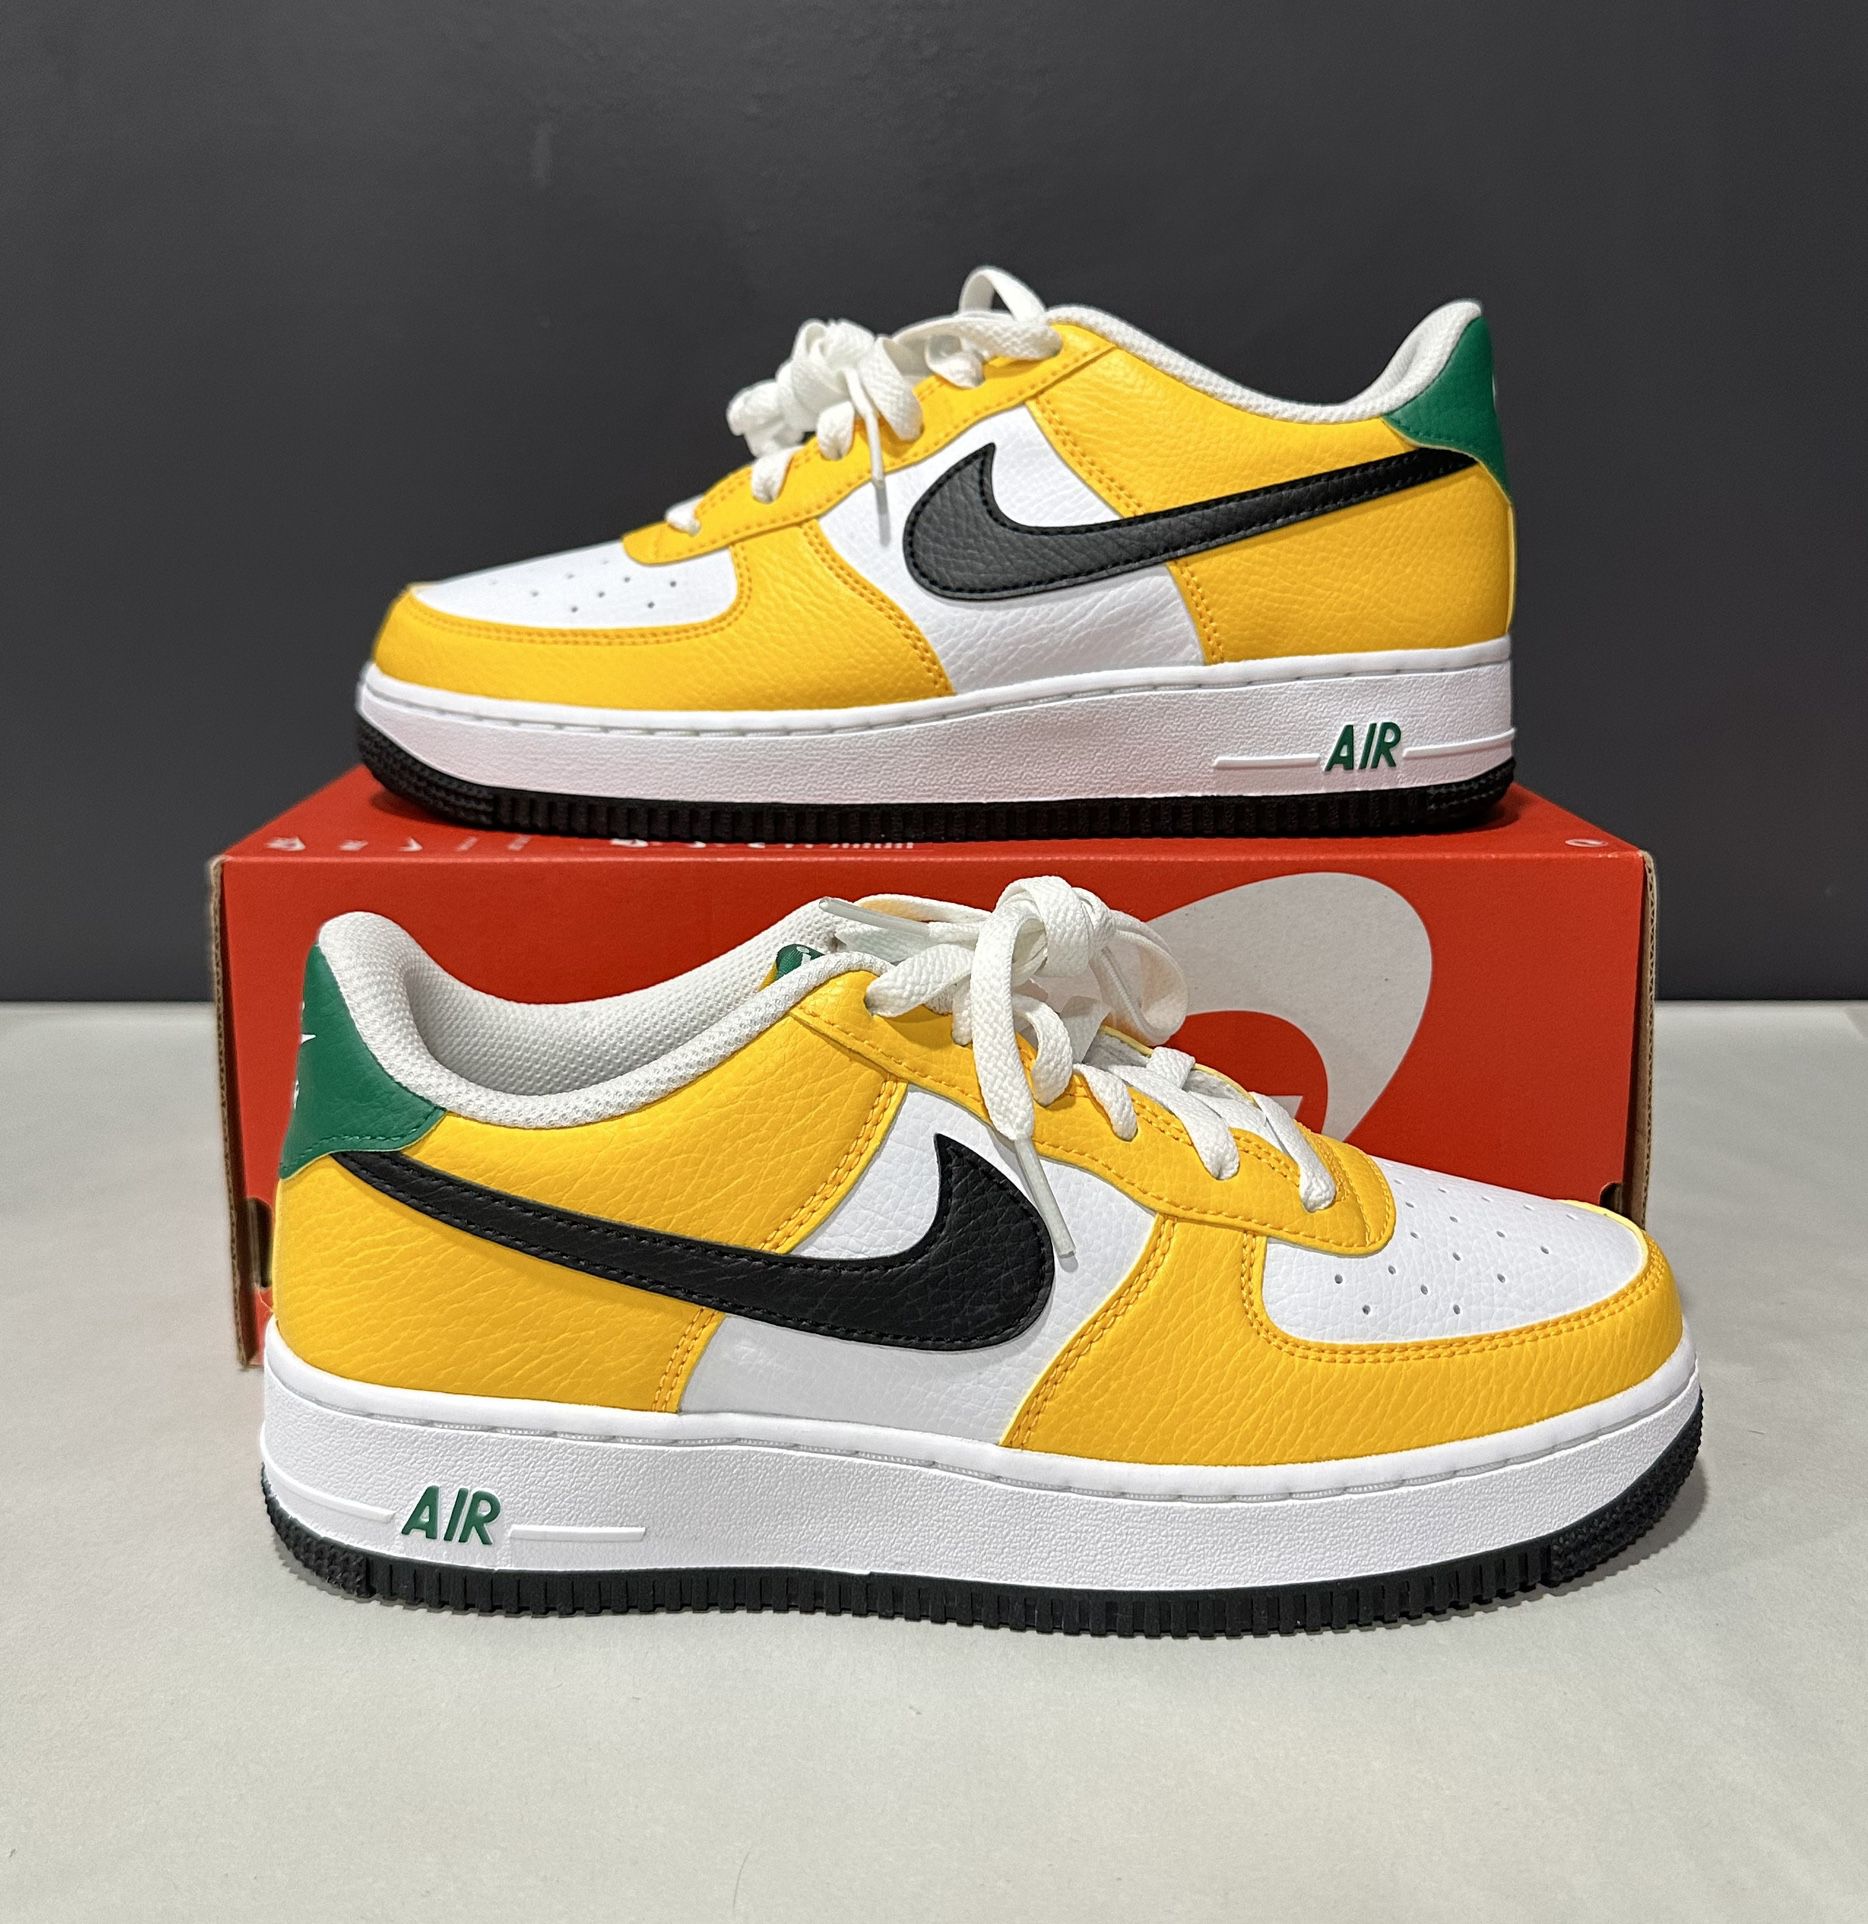 NIKE AIR FORCE ONE  Size 6Y   WOMENS SIZE - 8